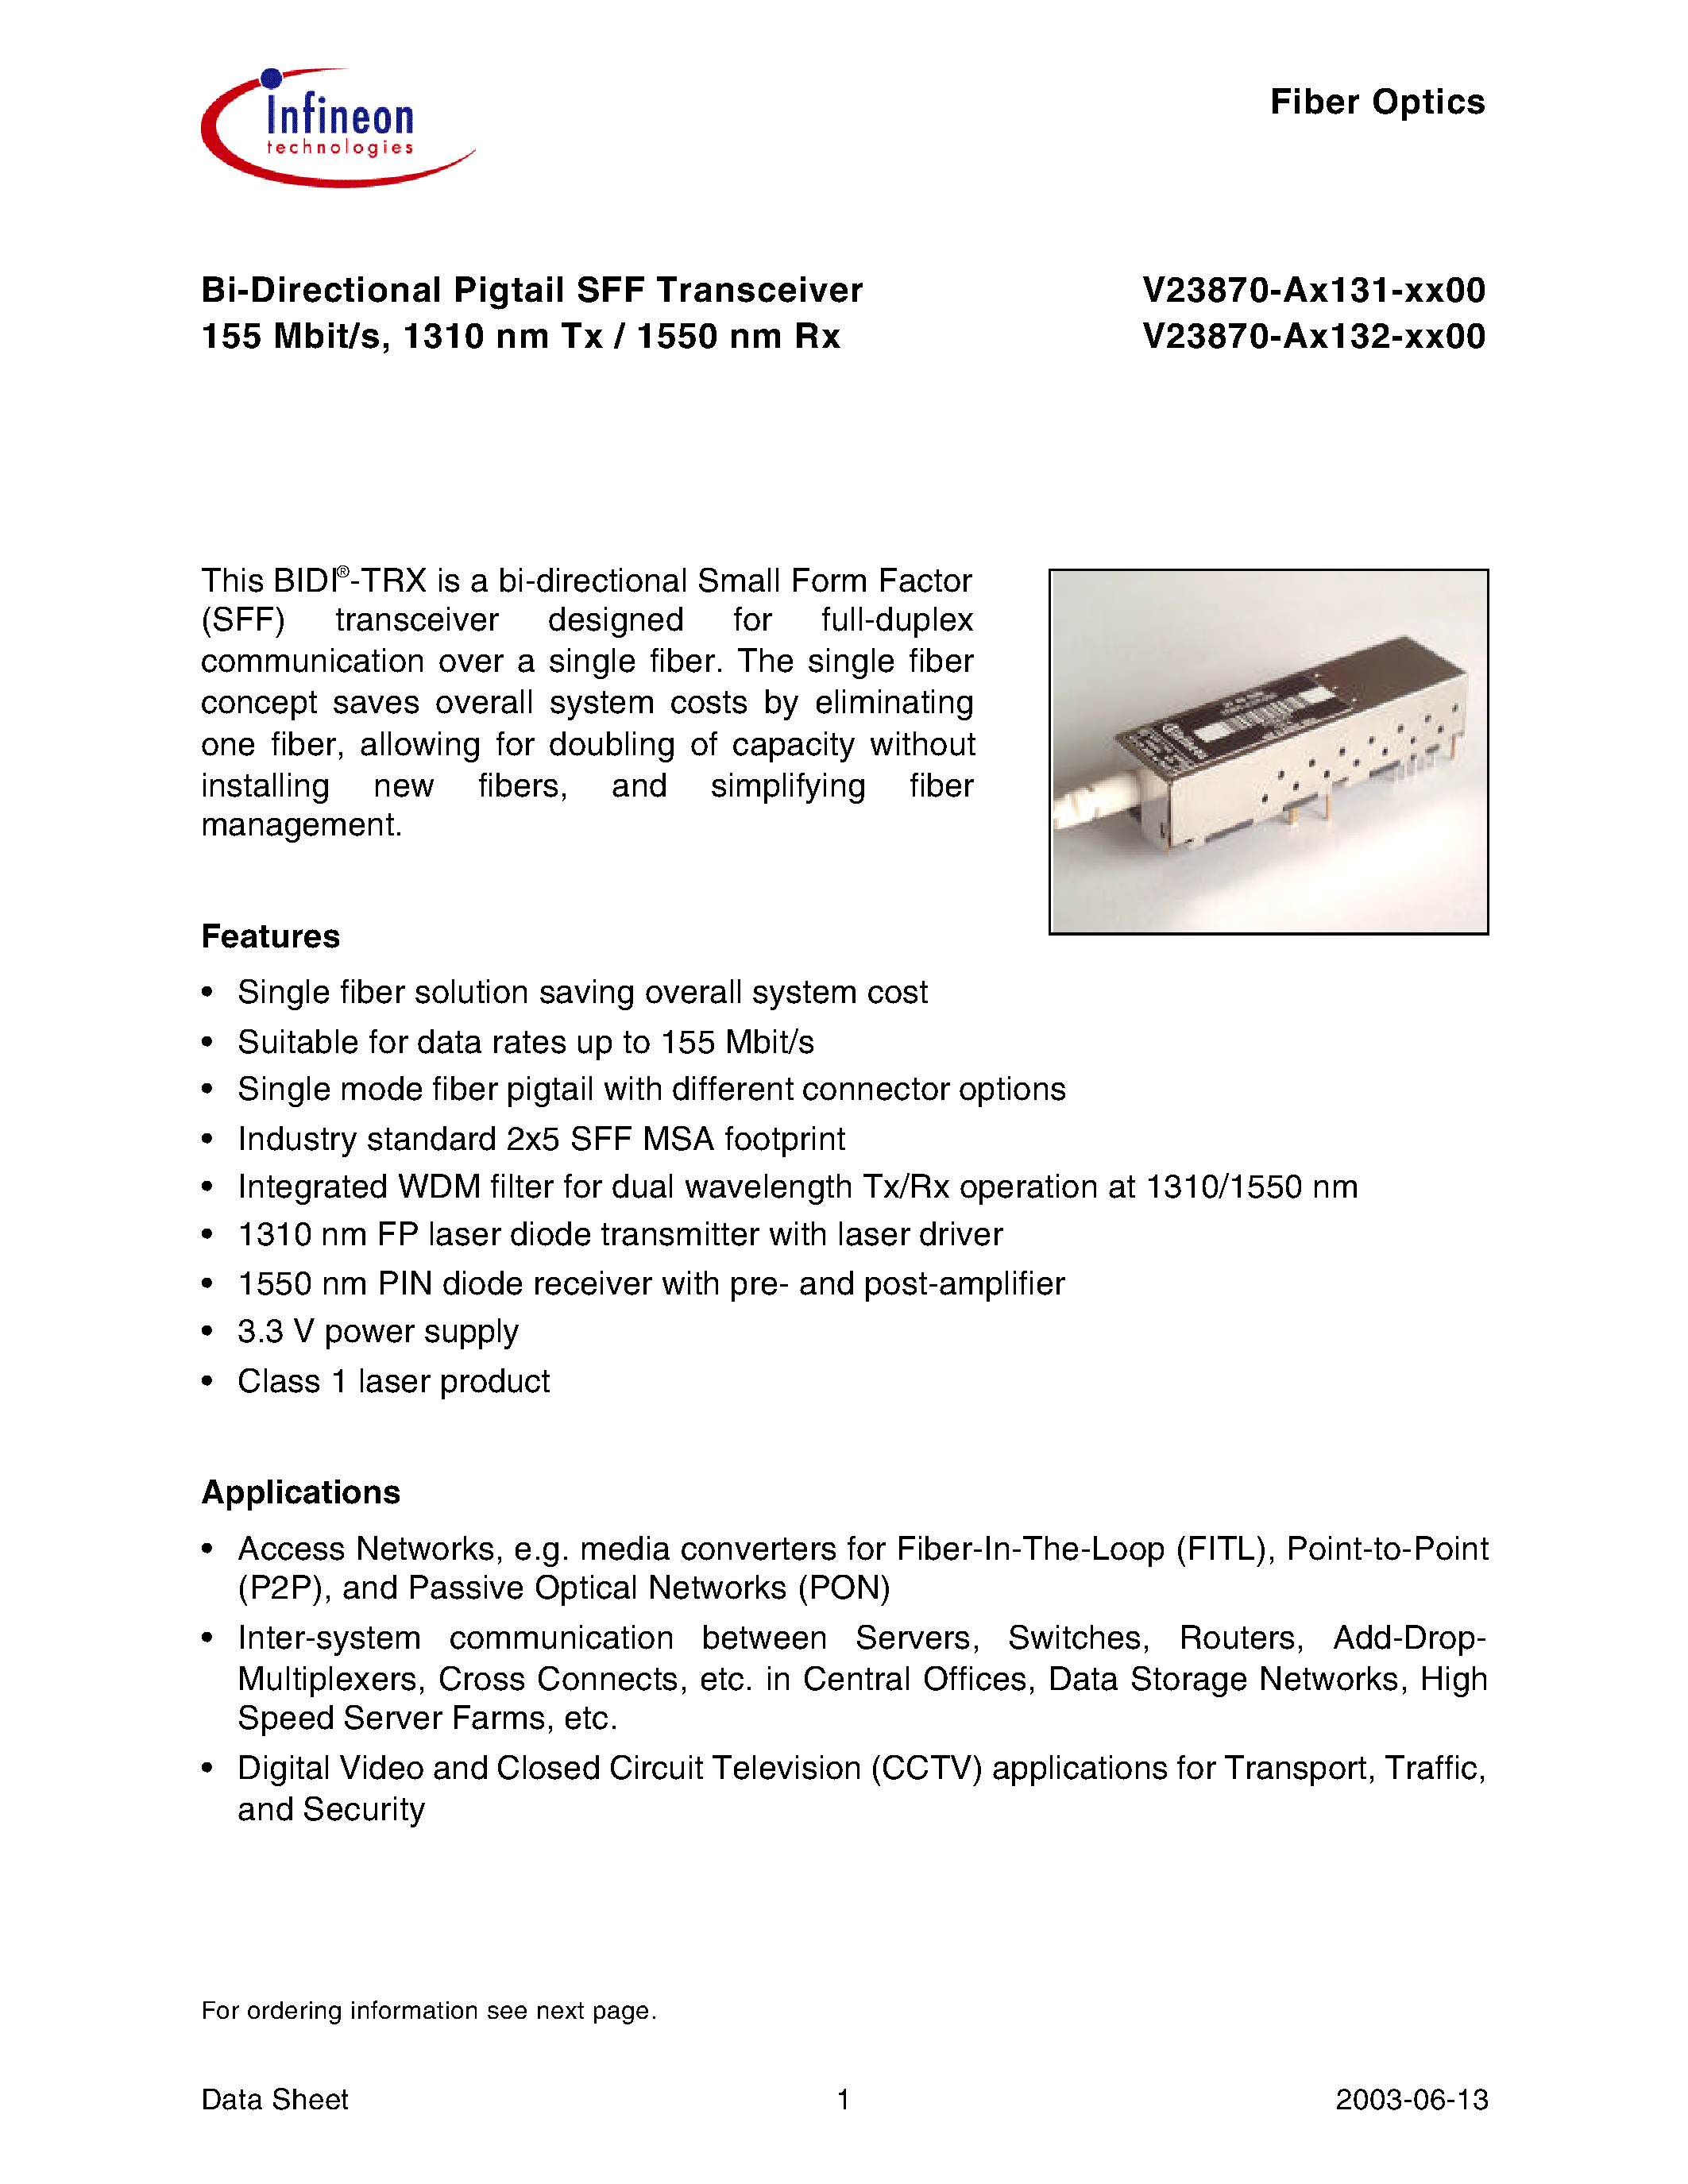 Datasheet V23870-A3131-B100 - Bi-Directional Pigtail SFF Transceiver 155 Mbit/s/ 1310 nm Tx / 1550 nm Rx page 1